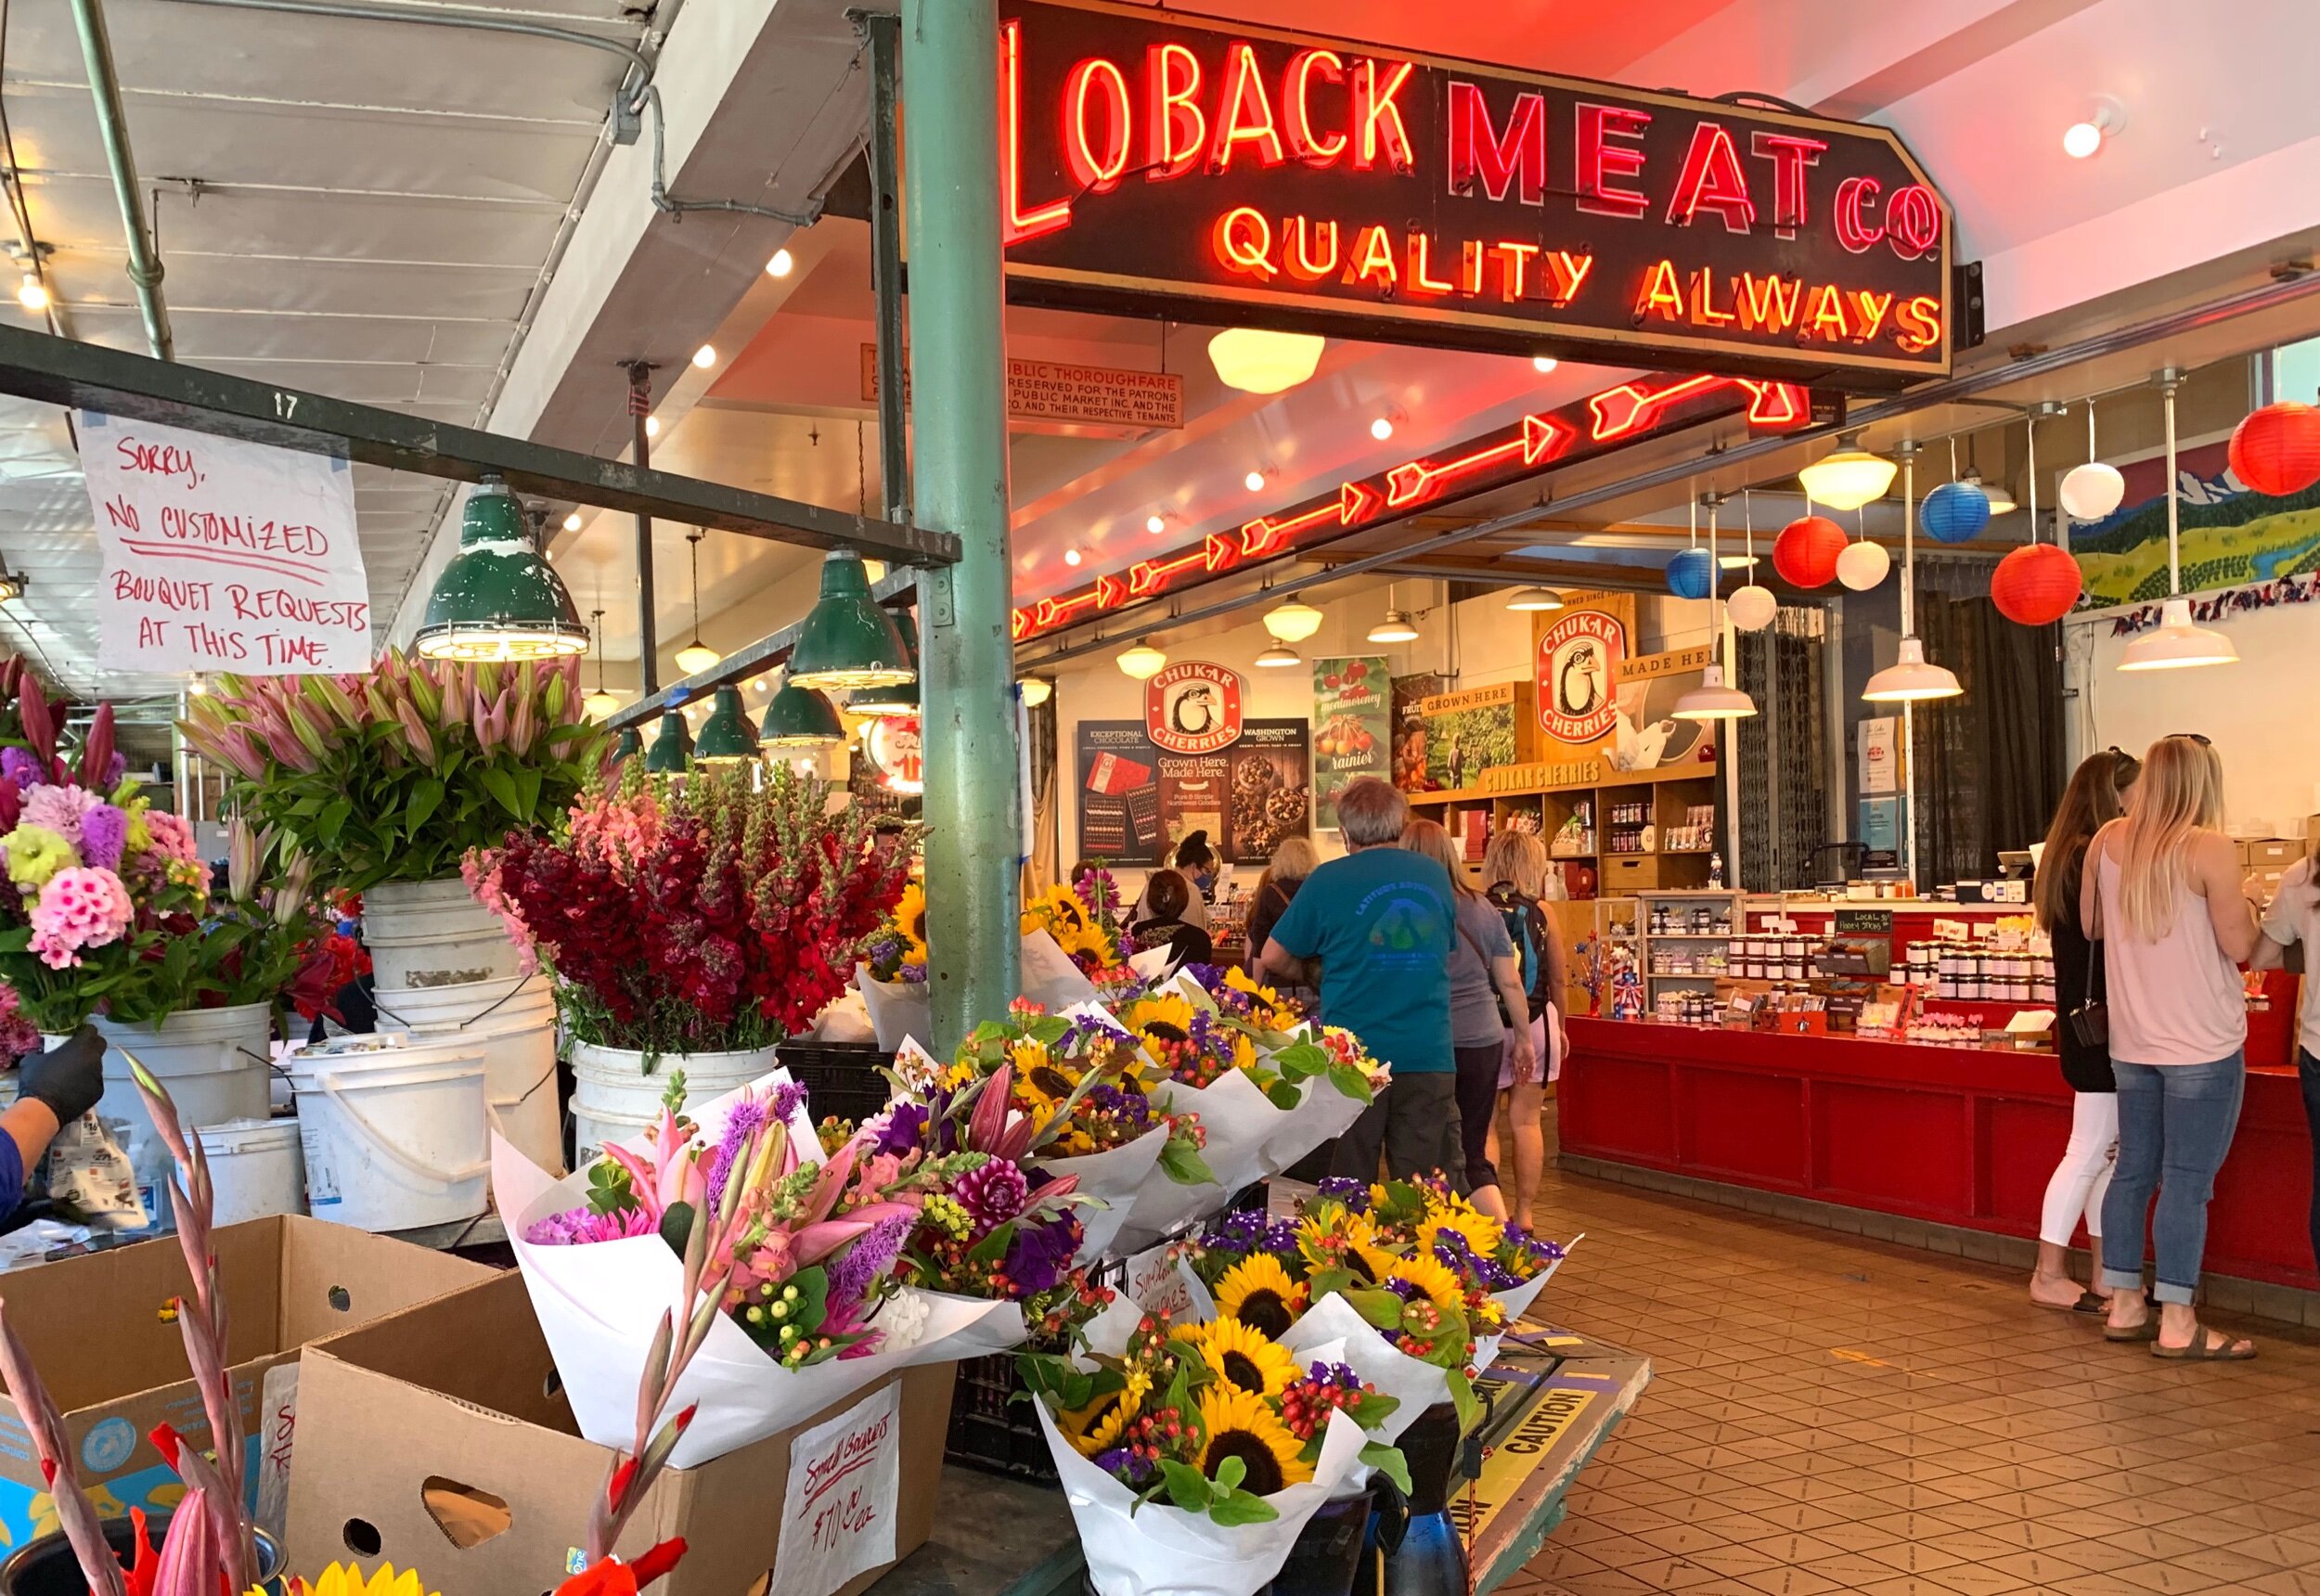  Beautiful flowers are abundantly plentiful in this part of the country, and for great prices.  Loback Meat Co. opened in 1946 and closed in 1986, but its neon sign lives on because it is now a historically protected icon. 